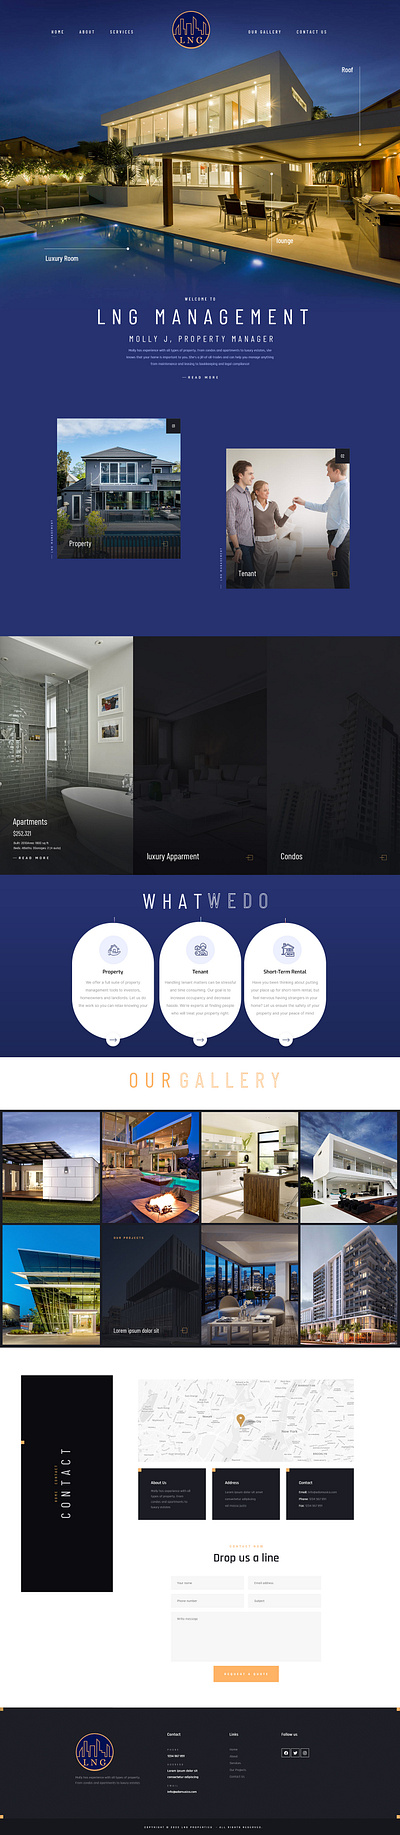 Web design Landing Page Design for LNG Real State Agency 3d animation branding graphic design logo motion graphics ui